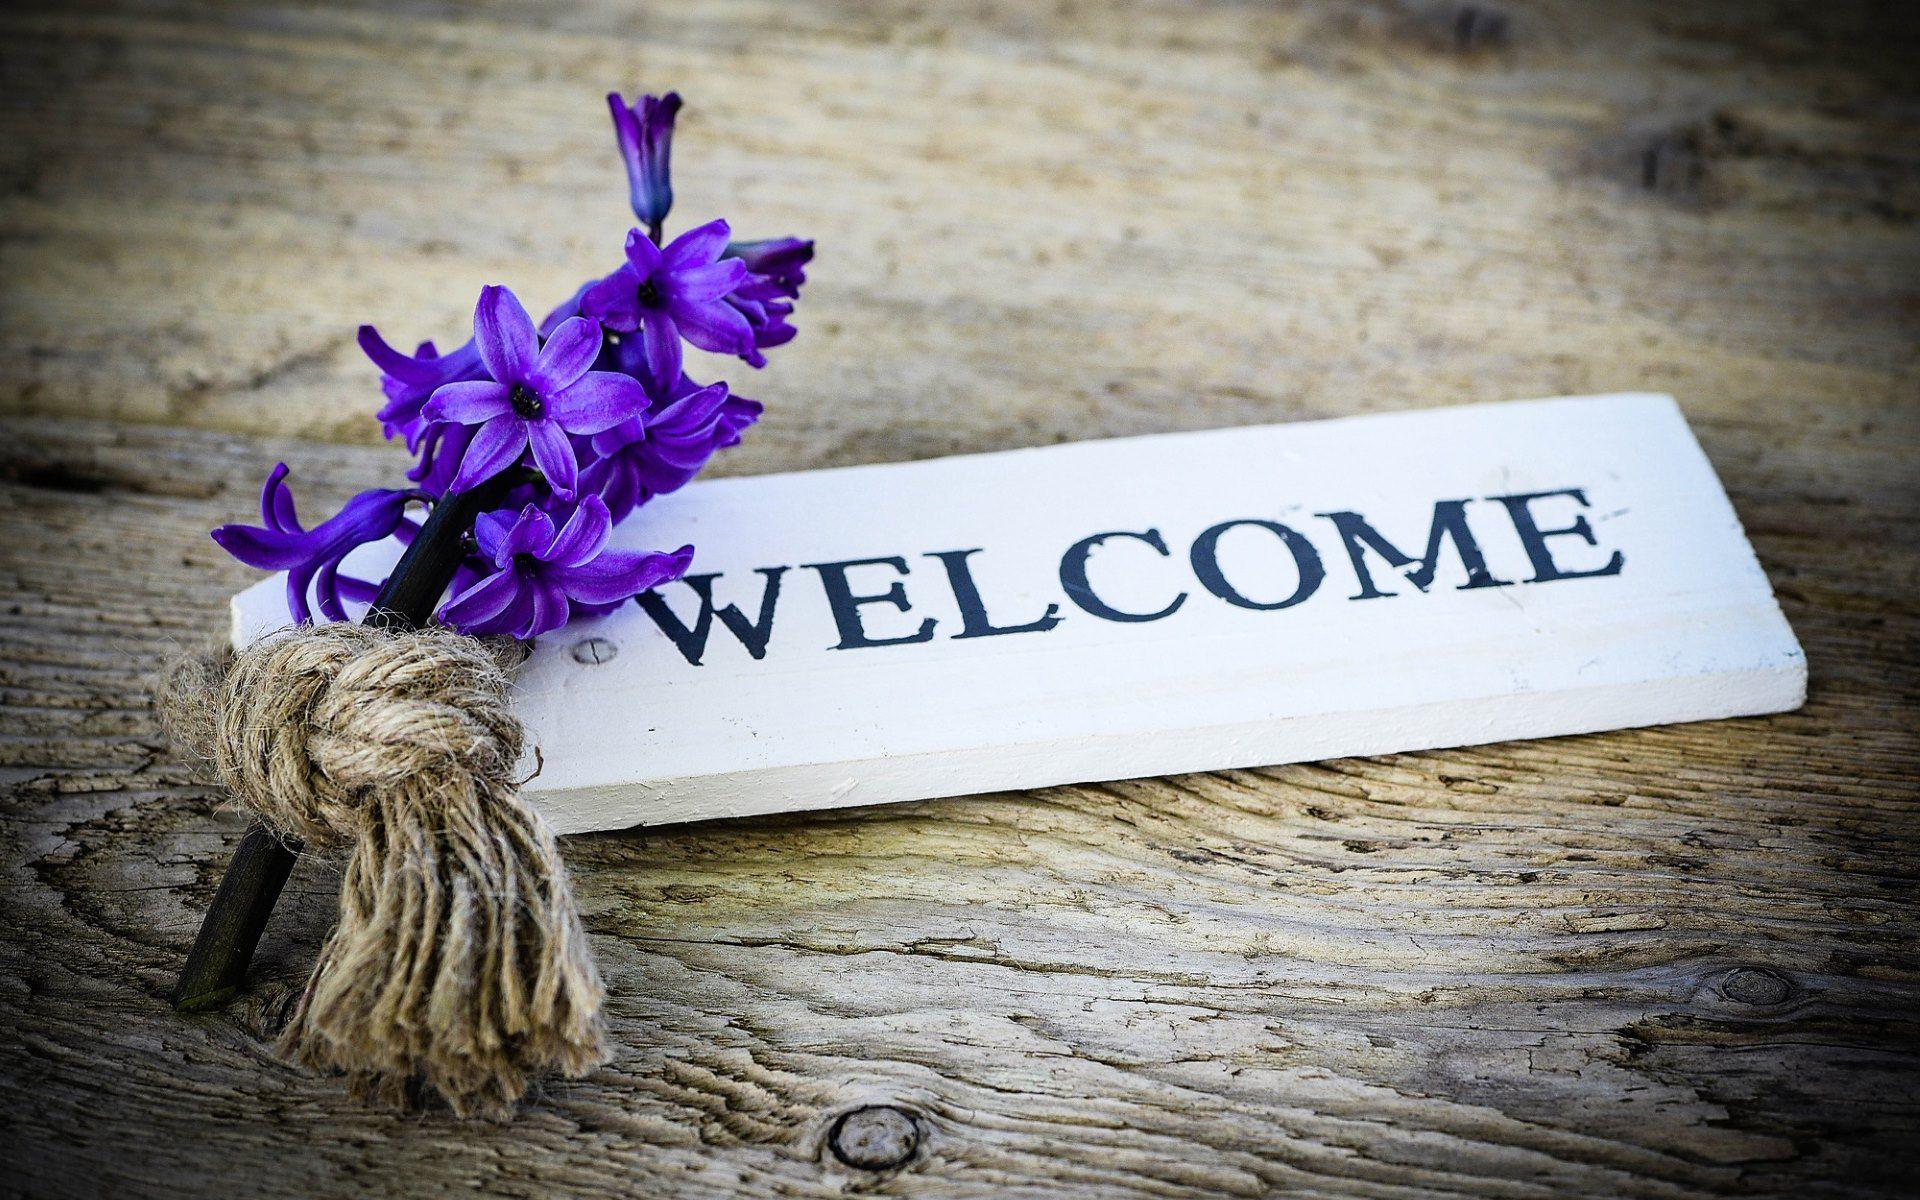 Welcome Wallpapers Wallpaper Cave